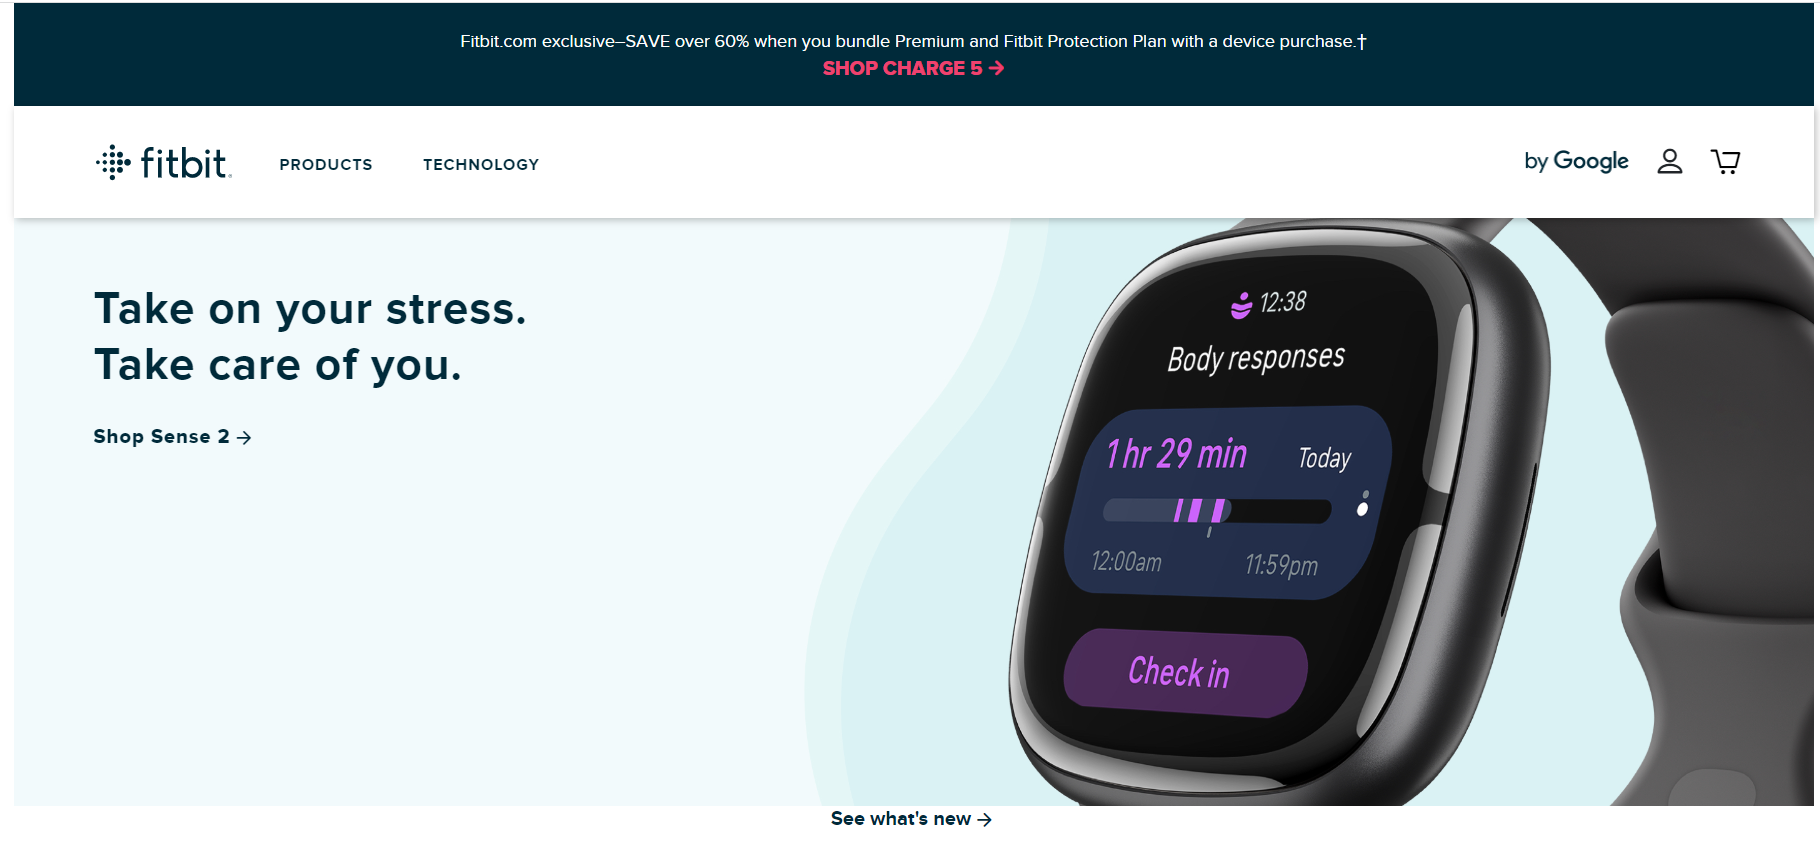 Fitbit's visual aesthetic, where they strategically use text sparingly, and use color strategically to call attention, as well as leveraging whitespace to create a clean and focused design.